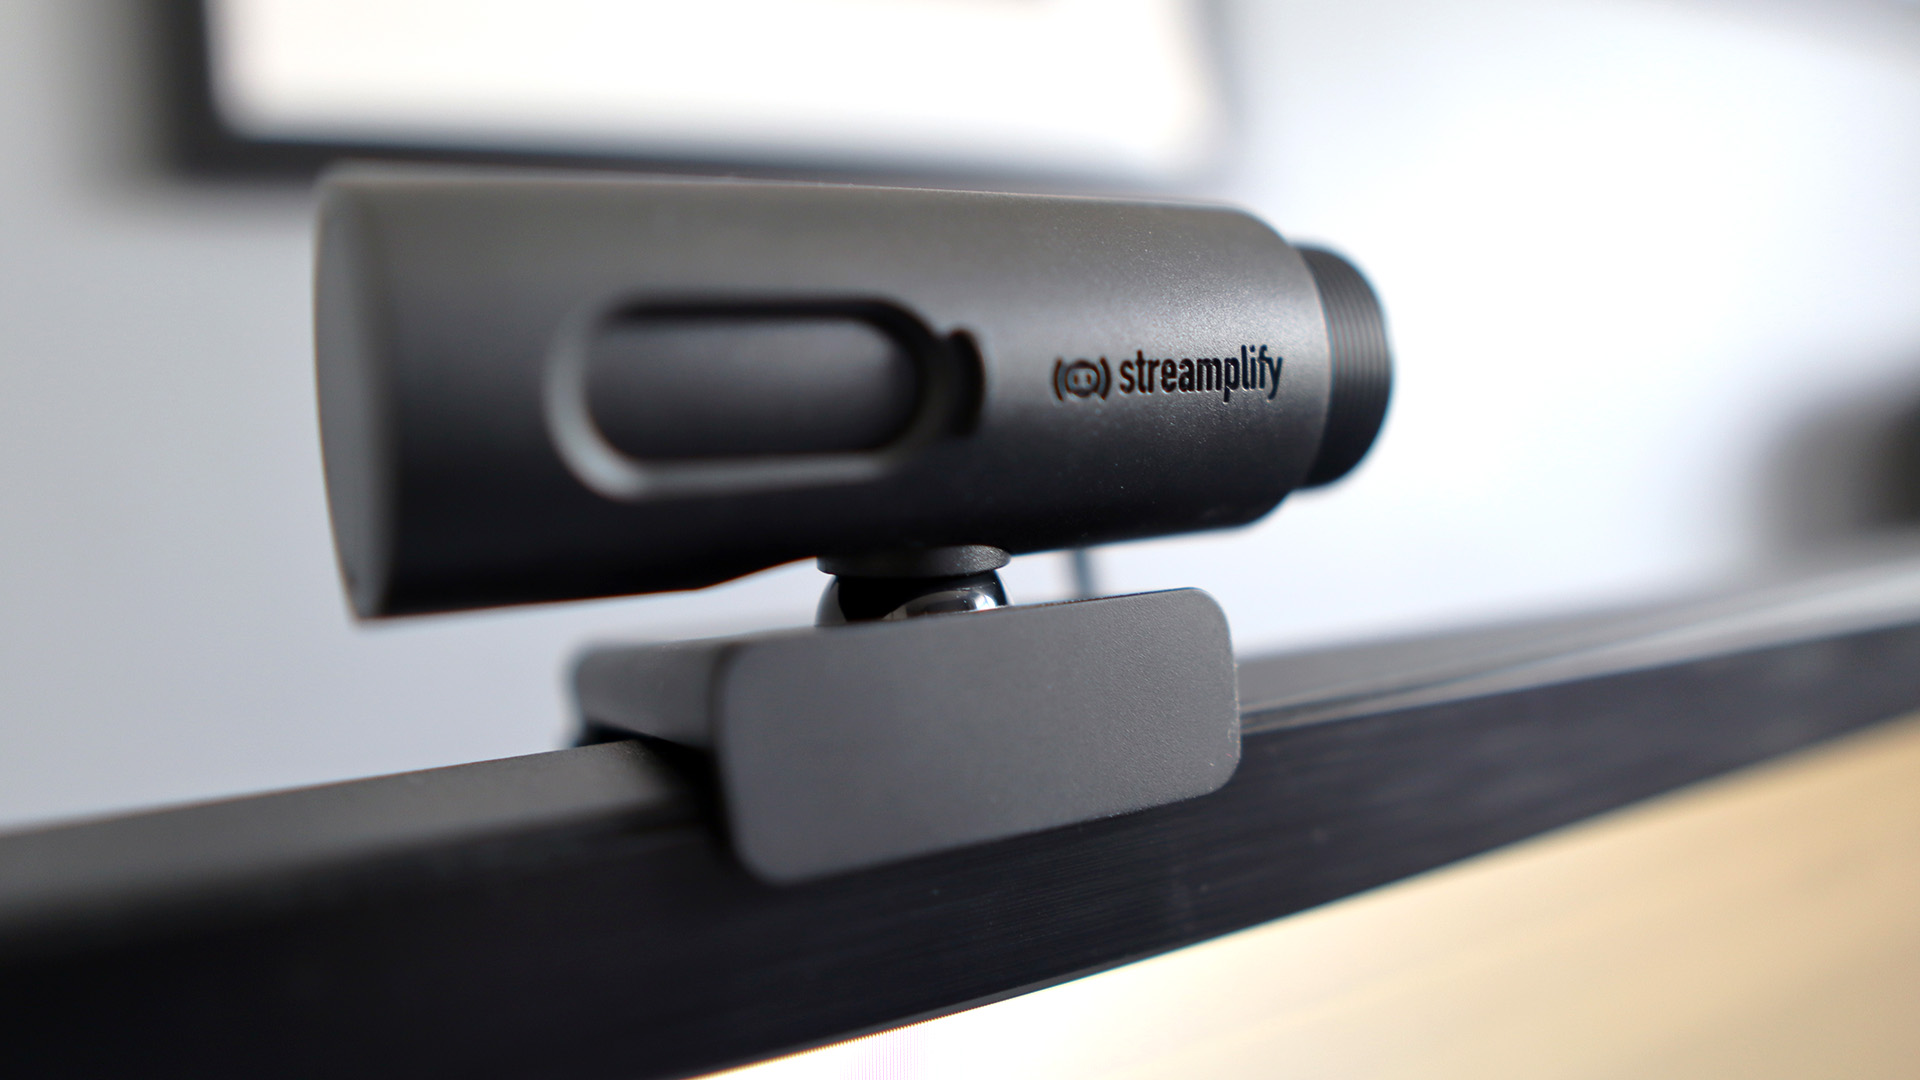 Streamplify Cam mounted on a PC monitor.